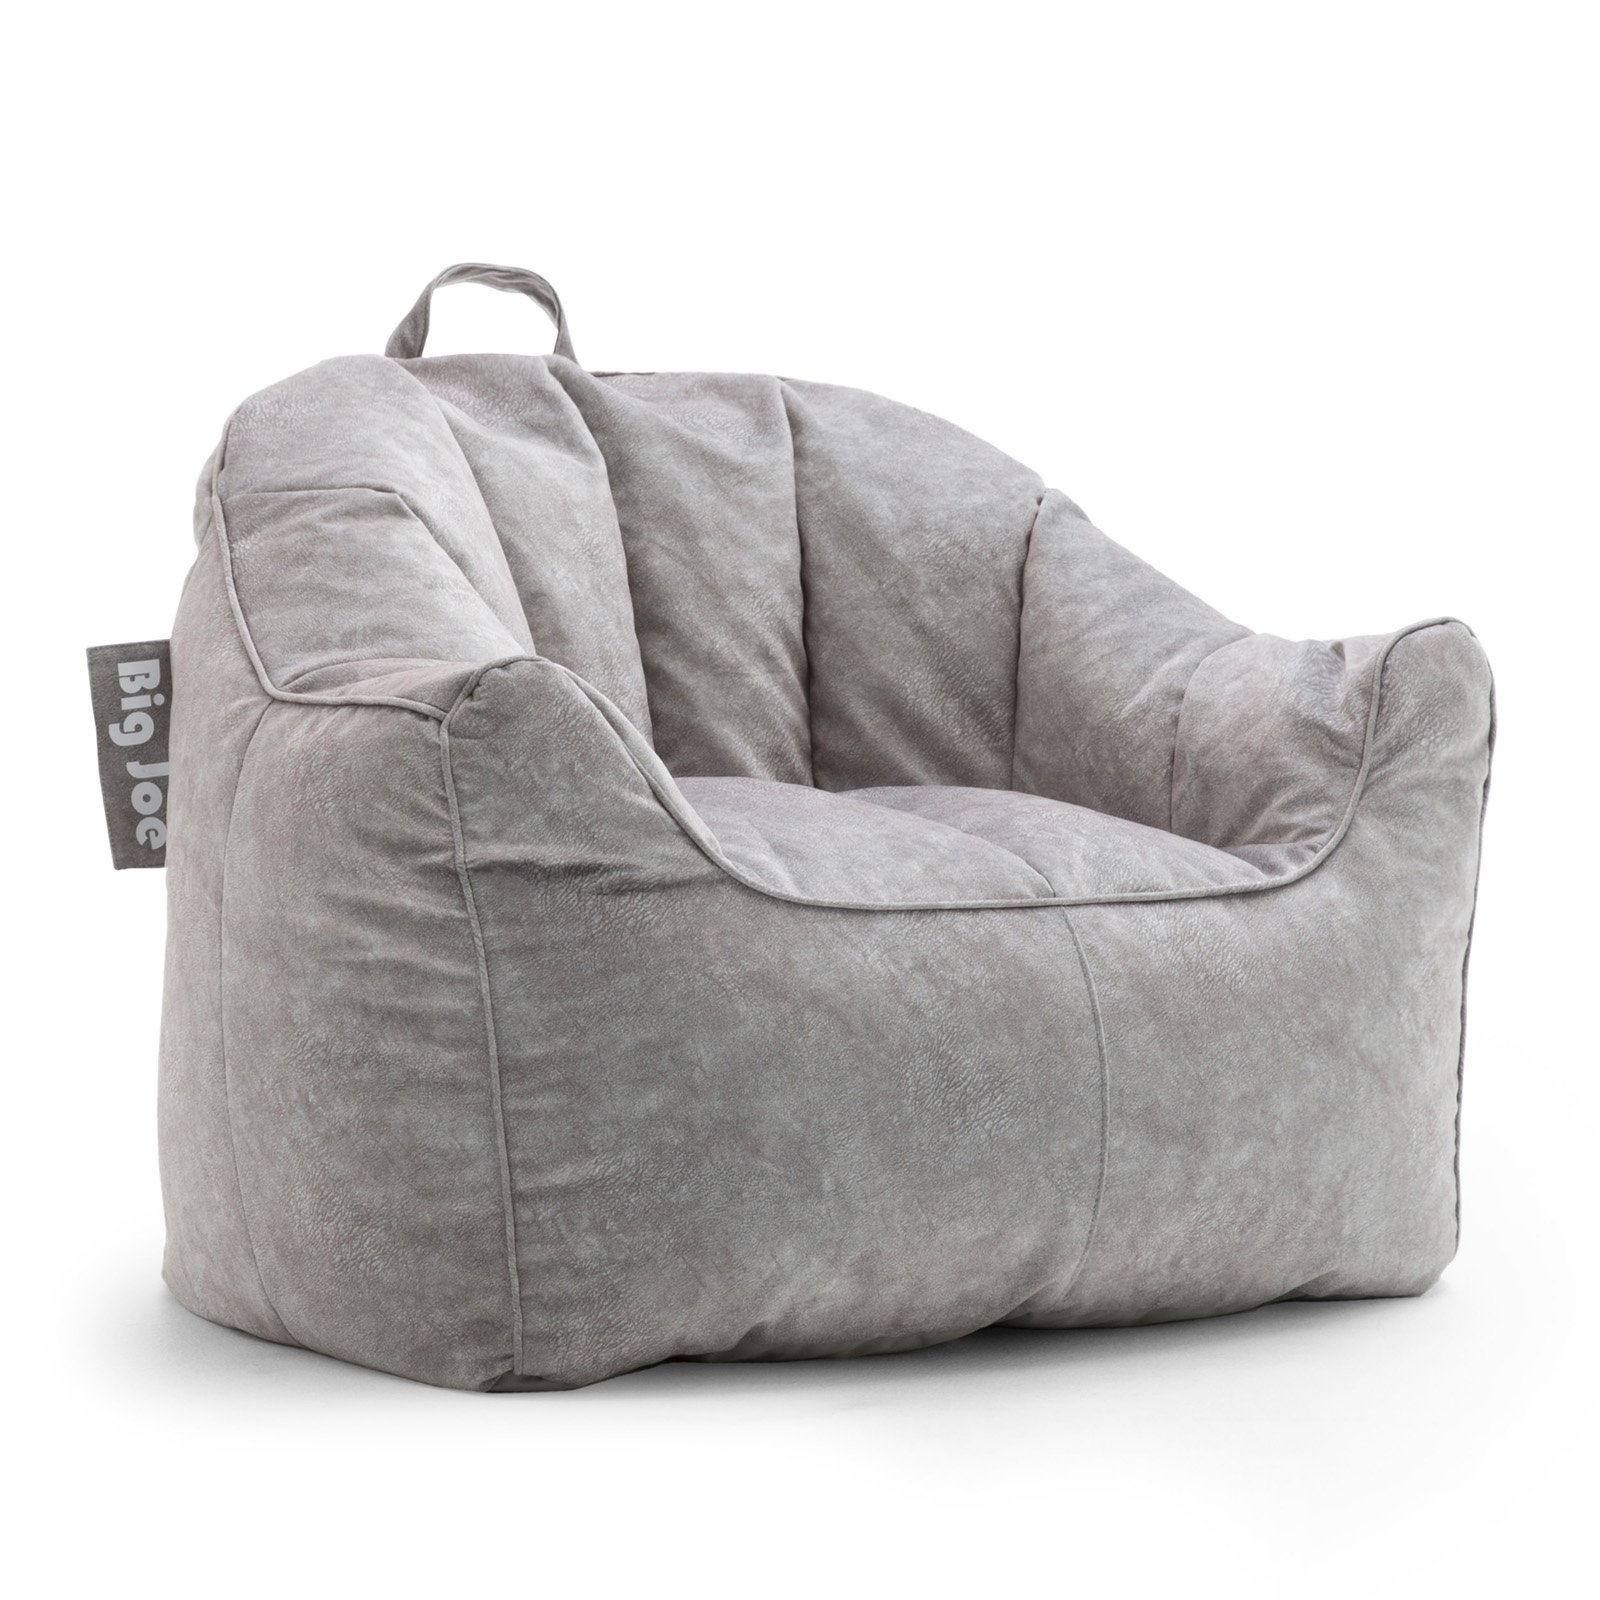  Bean Bag Chair Canada Jysk for Large Space